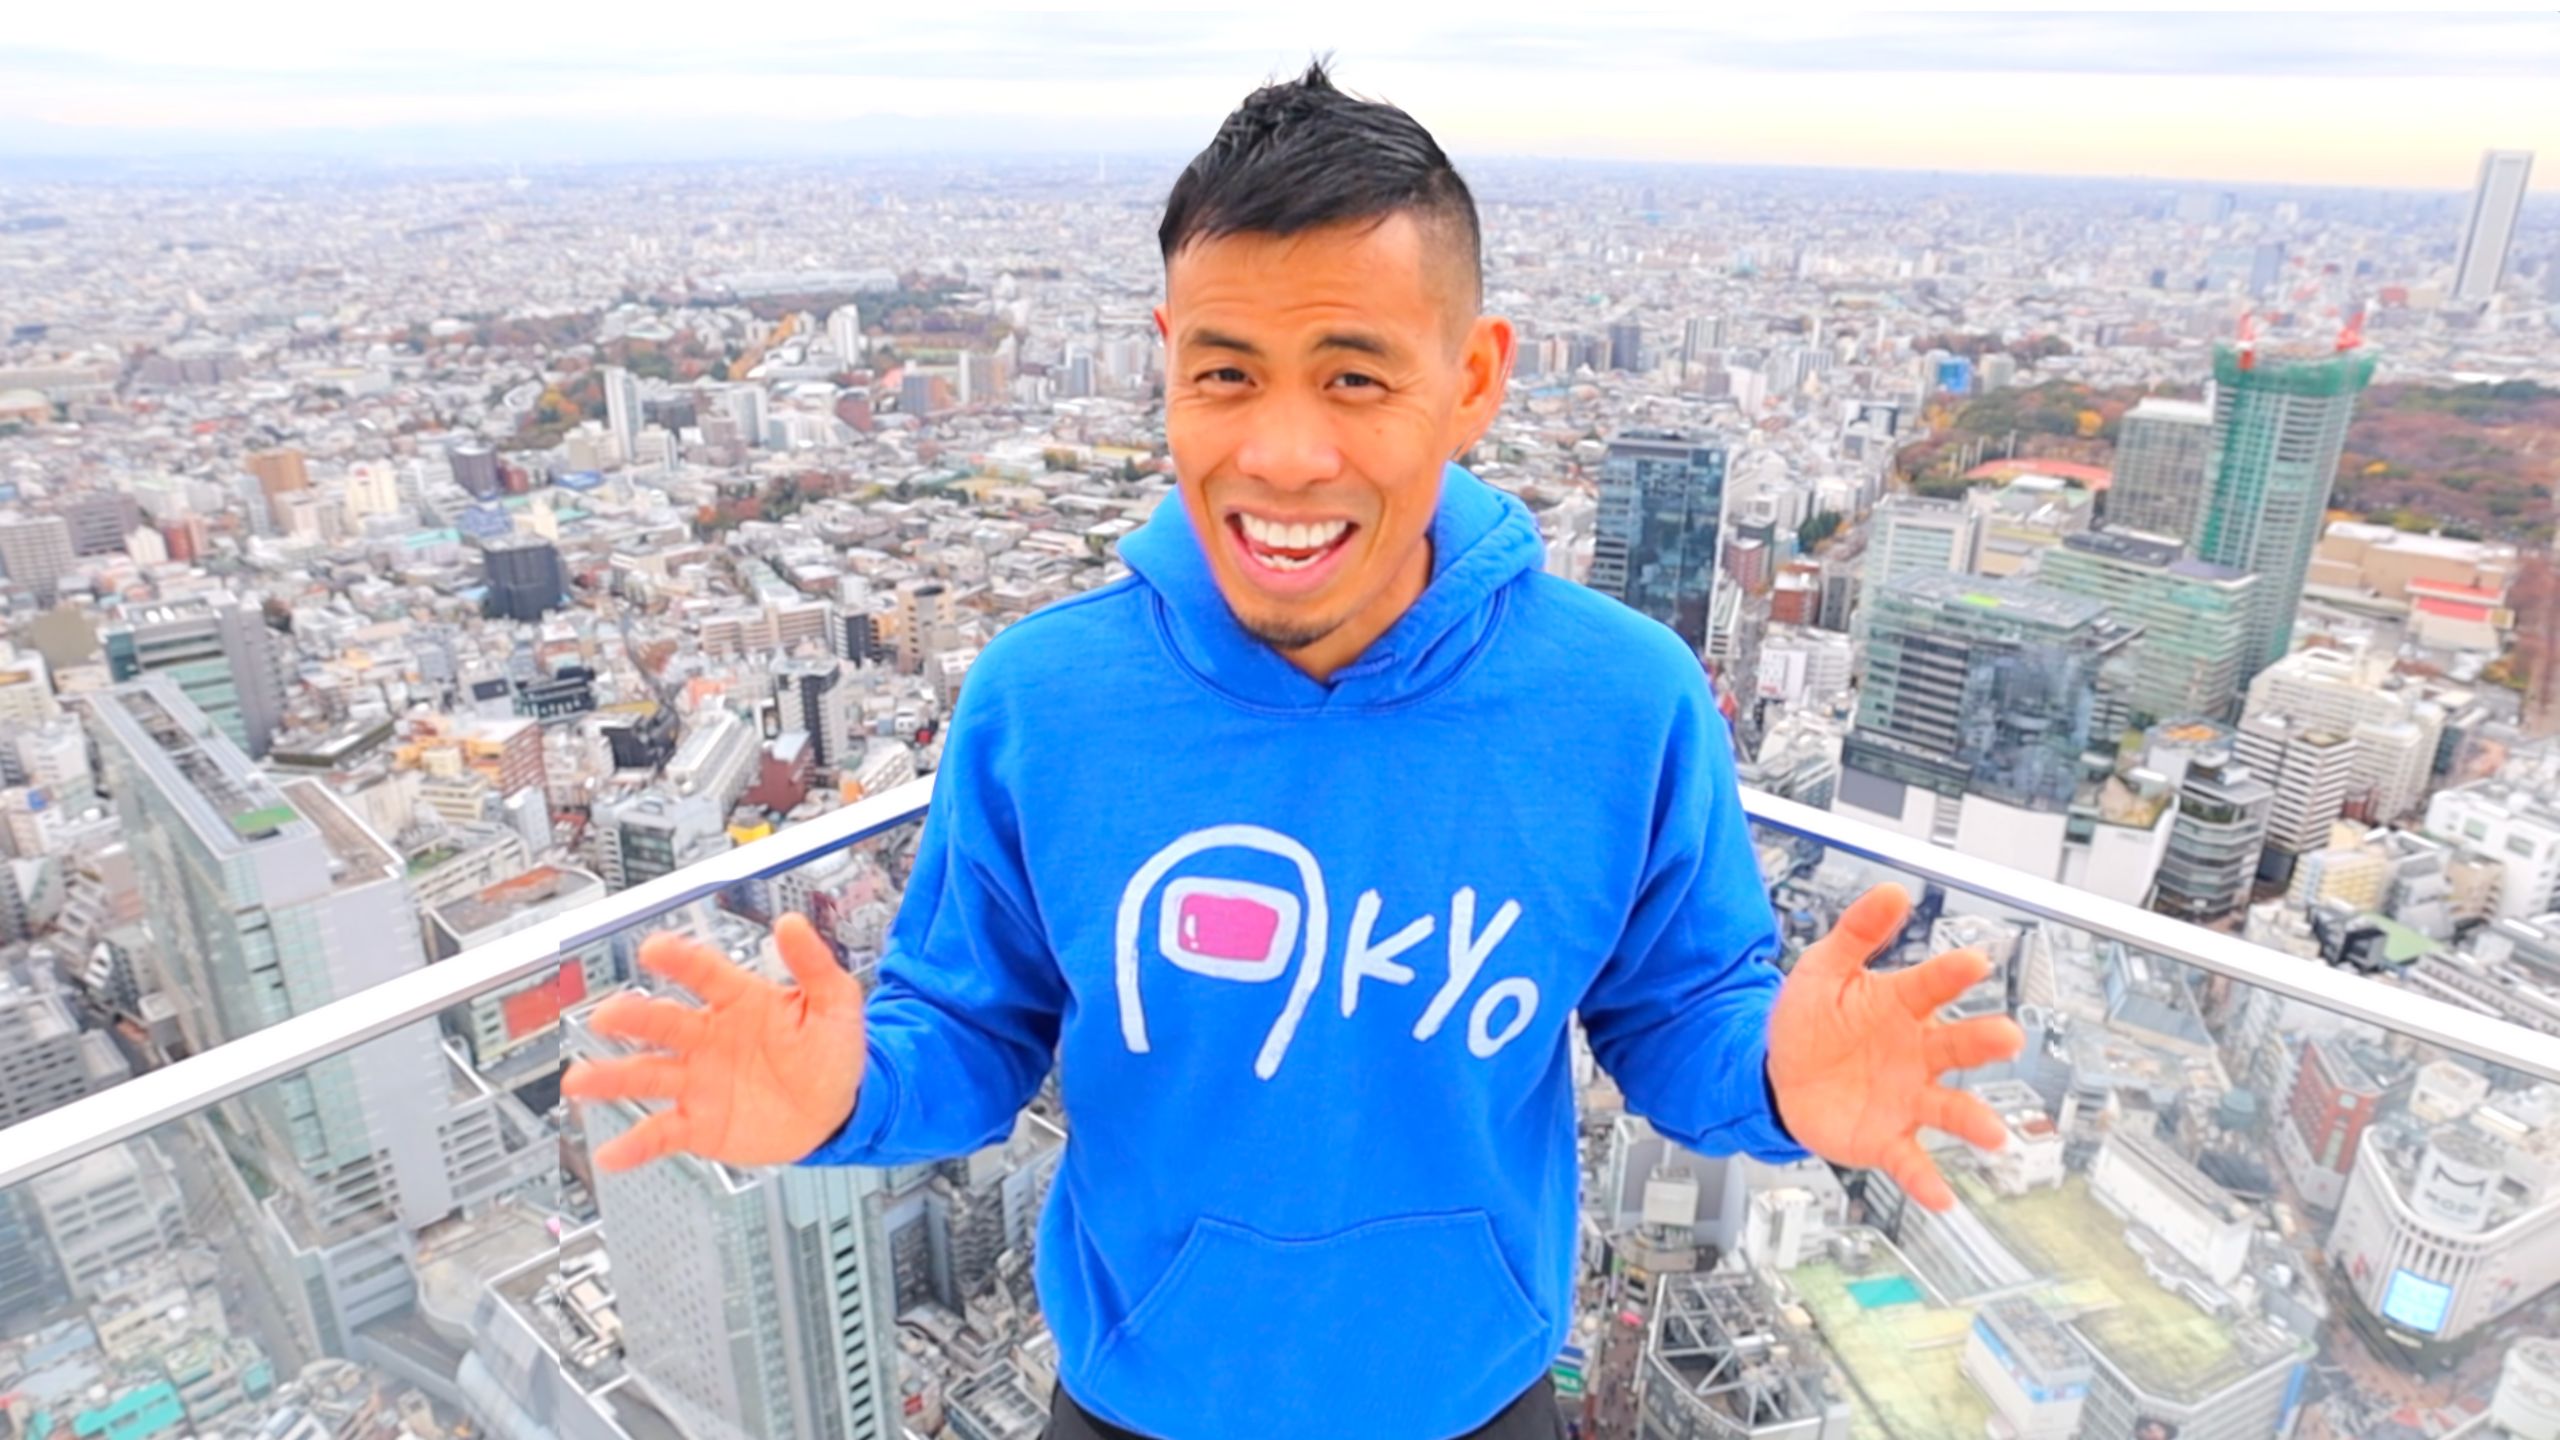 Paolo fromTOKYO J-vloggers YouTube